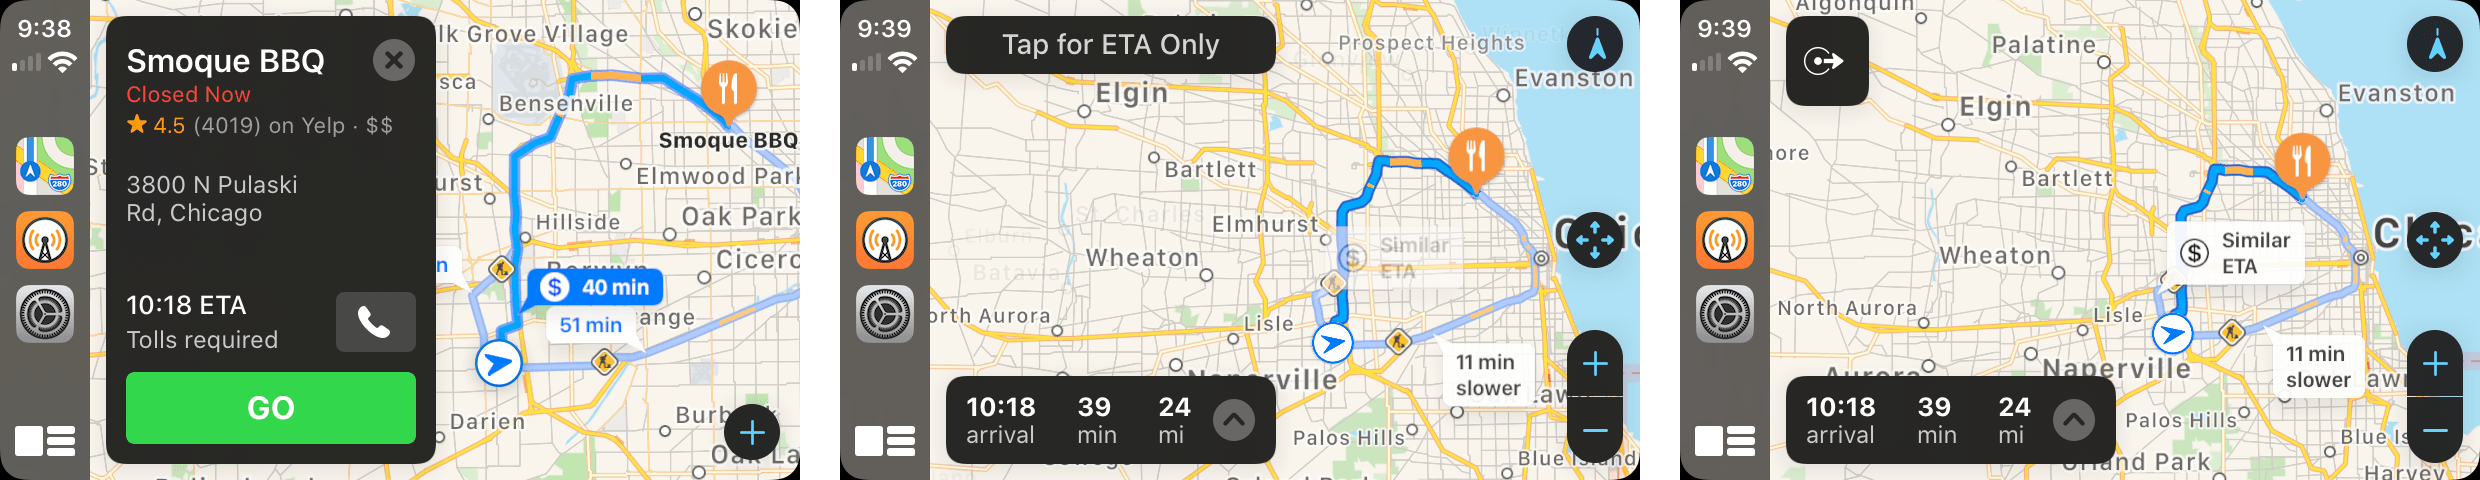 Tap 'Go' to start navigating and switch to ETA only mode by tapping the button that appears when you hit Go or tapping the turn-by-turn directions.